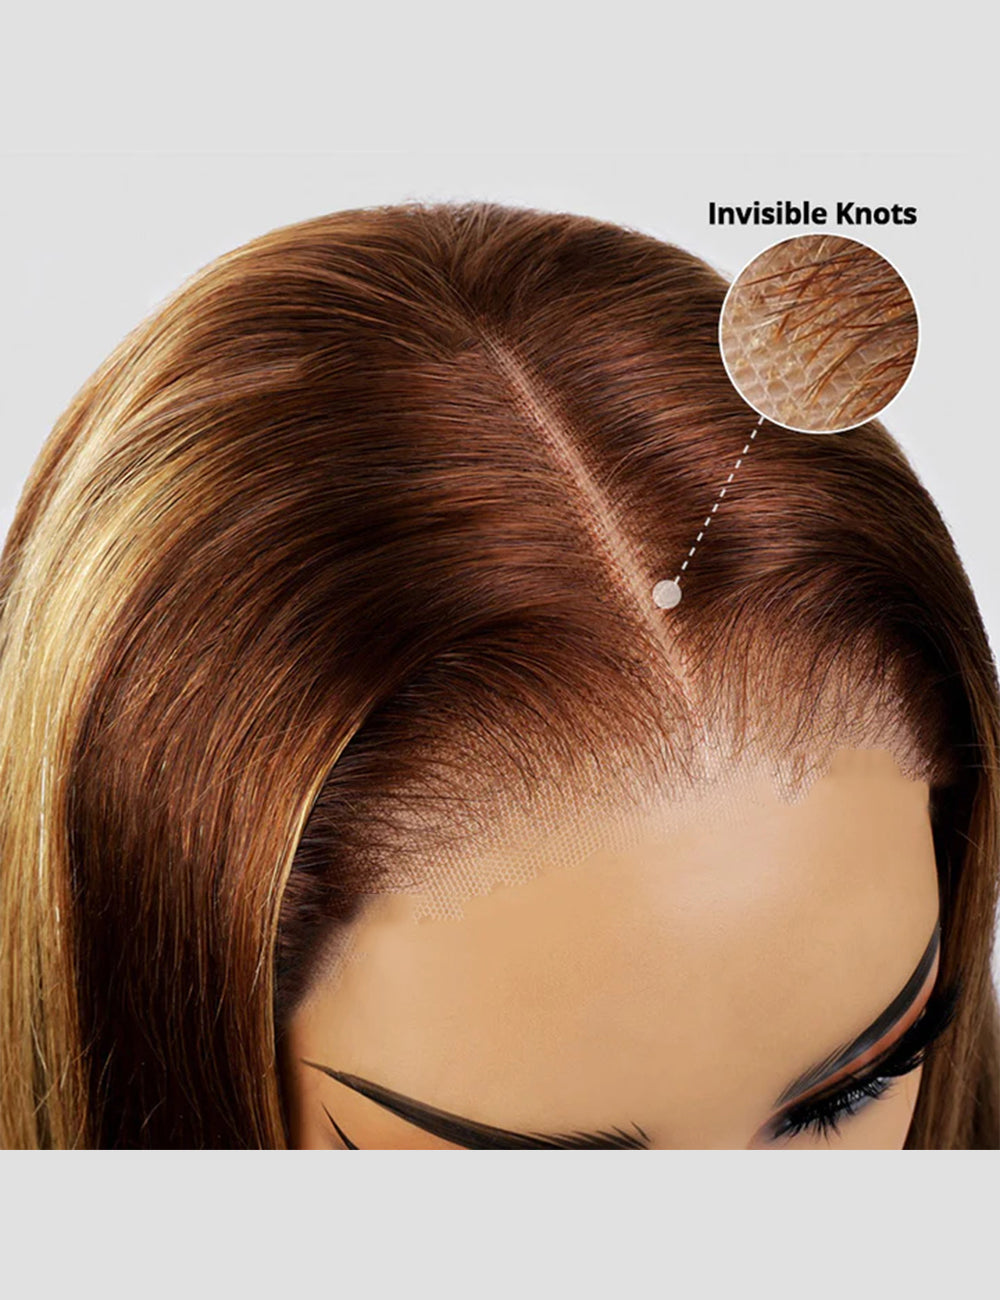 Invisible Knots Wear Go Glueless P4/27 Loose Deep Wave Wigs 13x4 Lace Frontal Wig Pre Cut Wigs